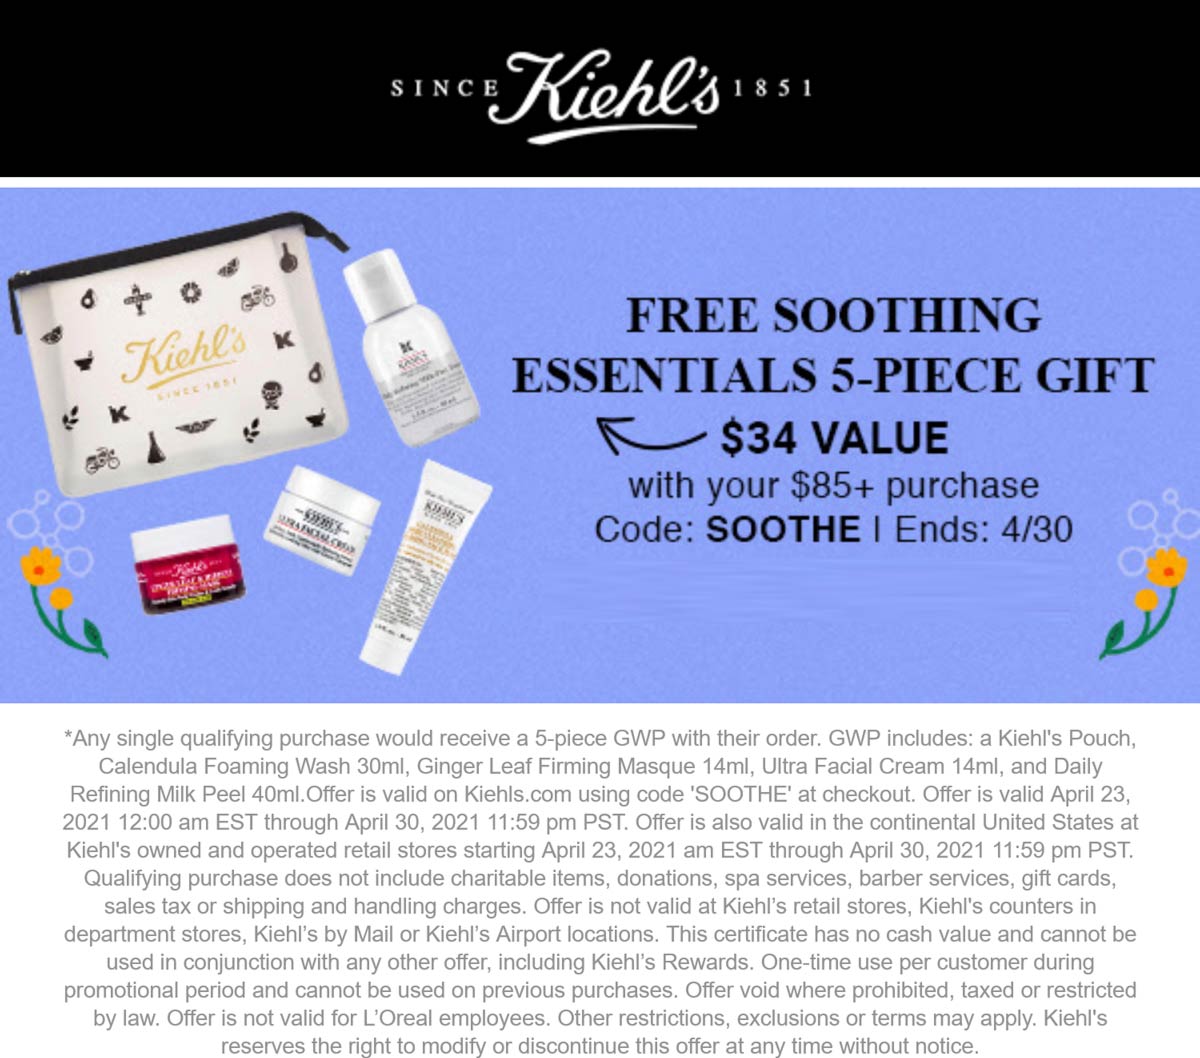 5pc 34 set free with 85 spent at Kiehls via promo code SOOTHE kiehls